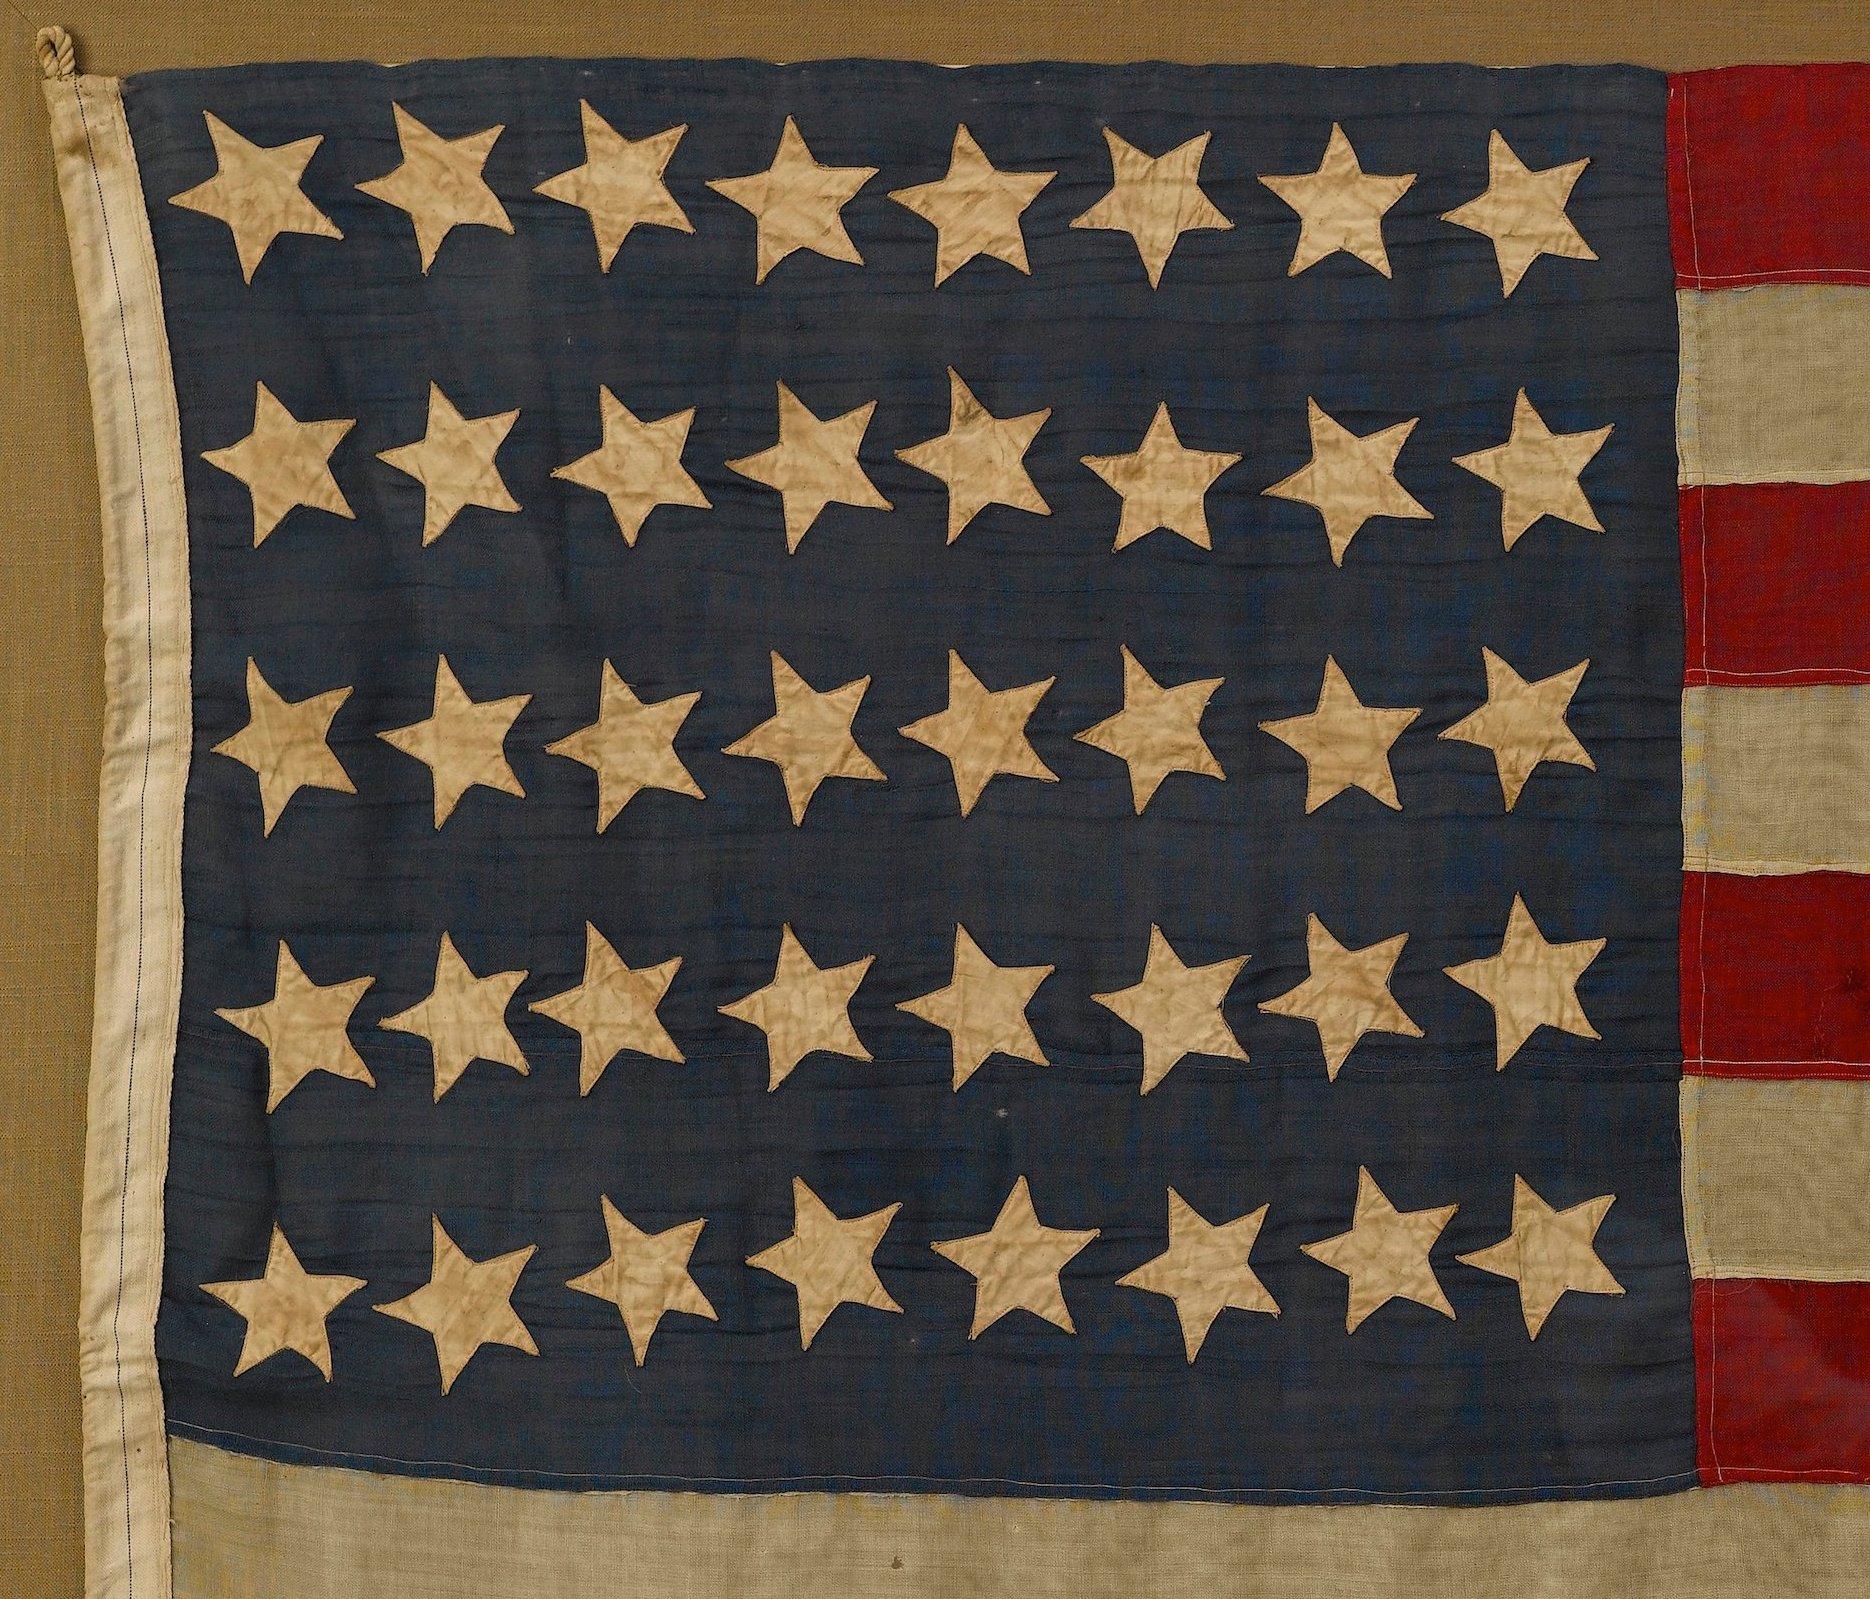 This 40-star American flag is very rare and celebrates the addition of North and South Dakota to the Union. 

The body of the flag is constructed of wool, with 40 machine-sewn, double-applique cotton stars configured in 8/8/8/8/8 horizontal rows.